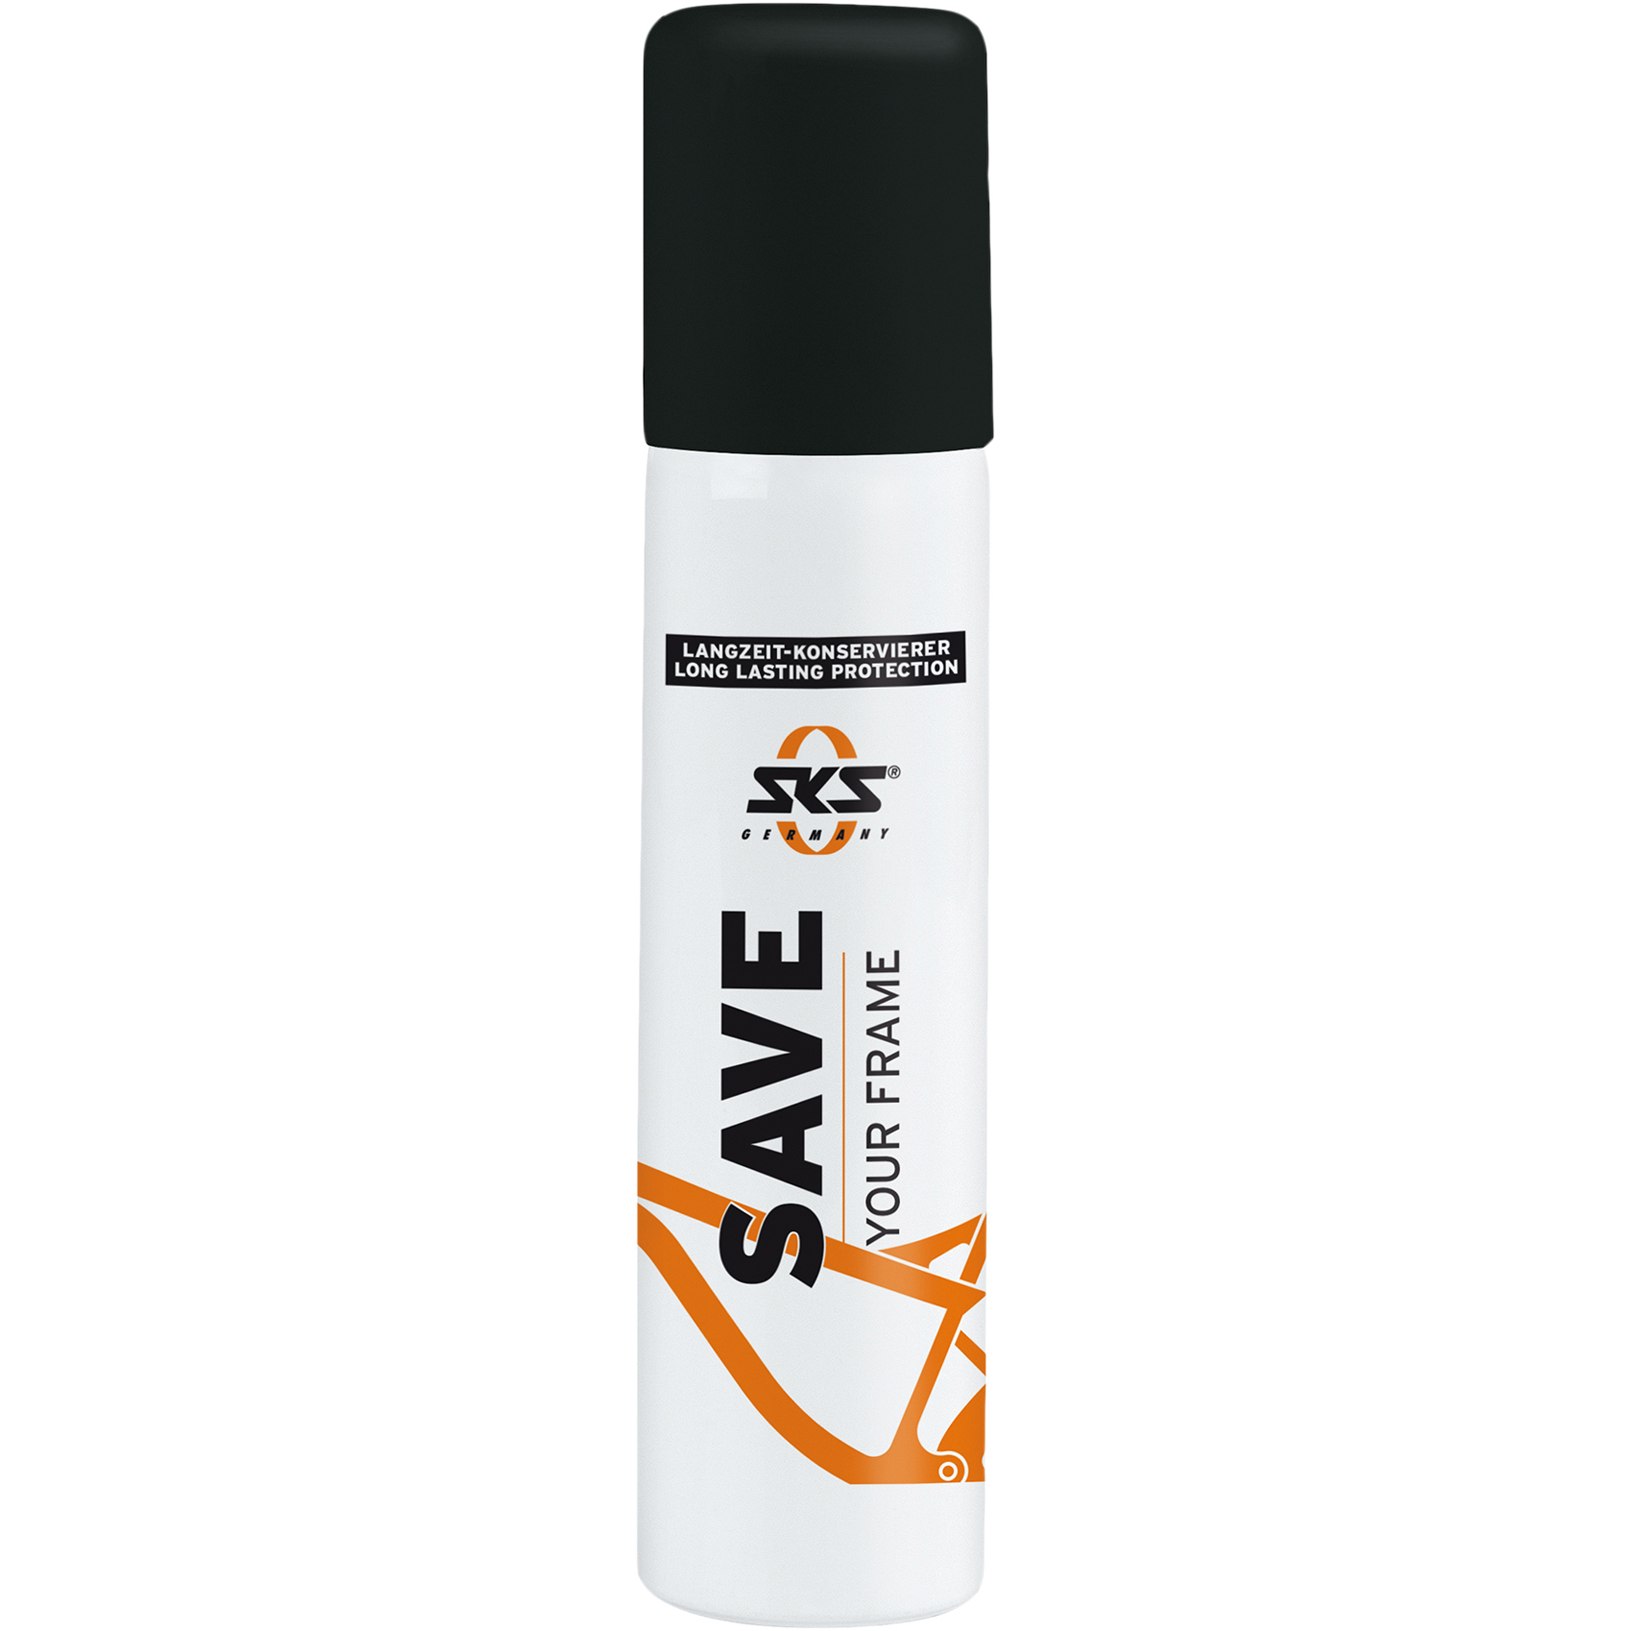 Image of SKS Save Your Frame Long Lasting Protection Spray 100ml